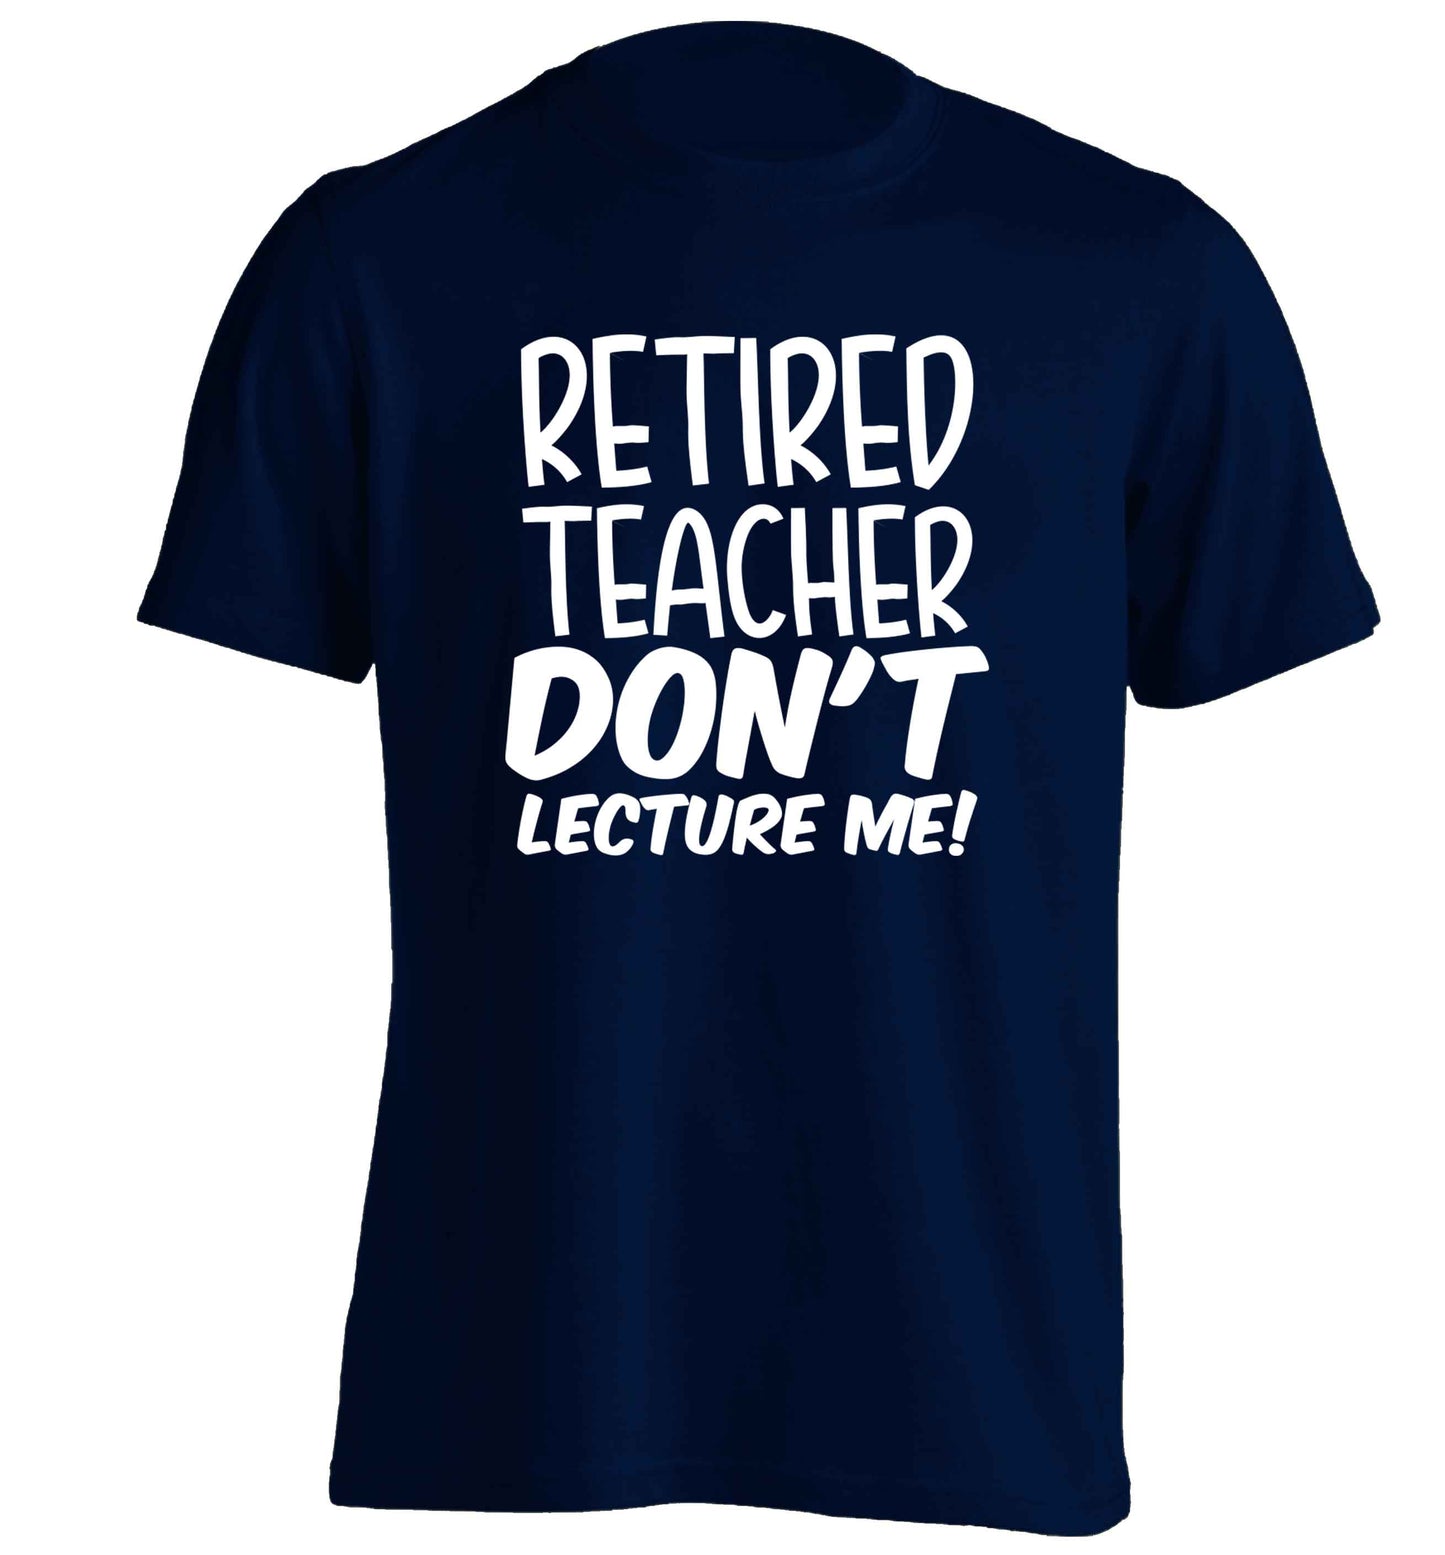 Retired teacher don't lecture me! adults unisex navy Tshirt 2XL